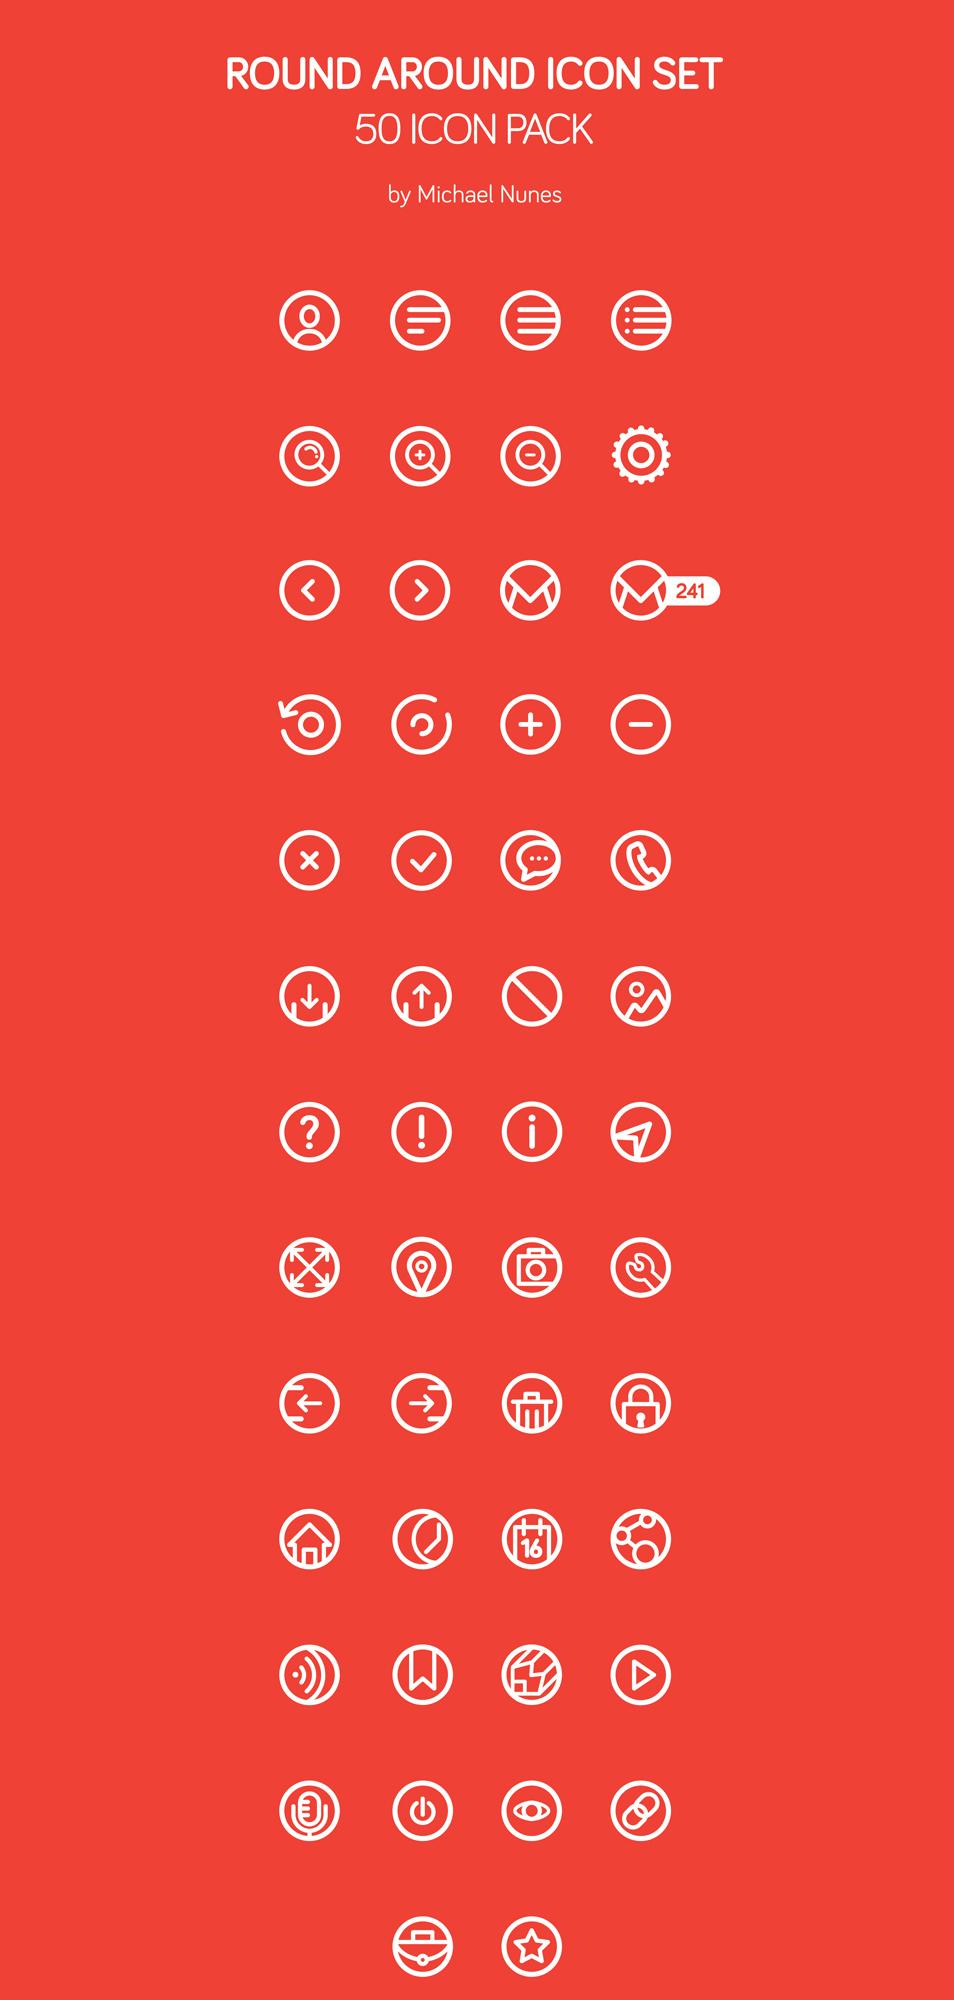 AI Vector Web Icons - 50 Round Around Icon Pack